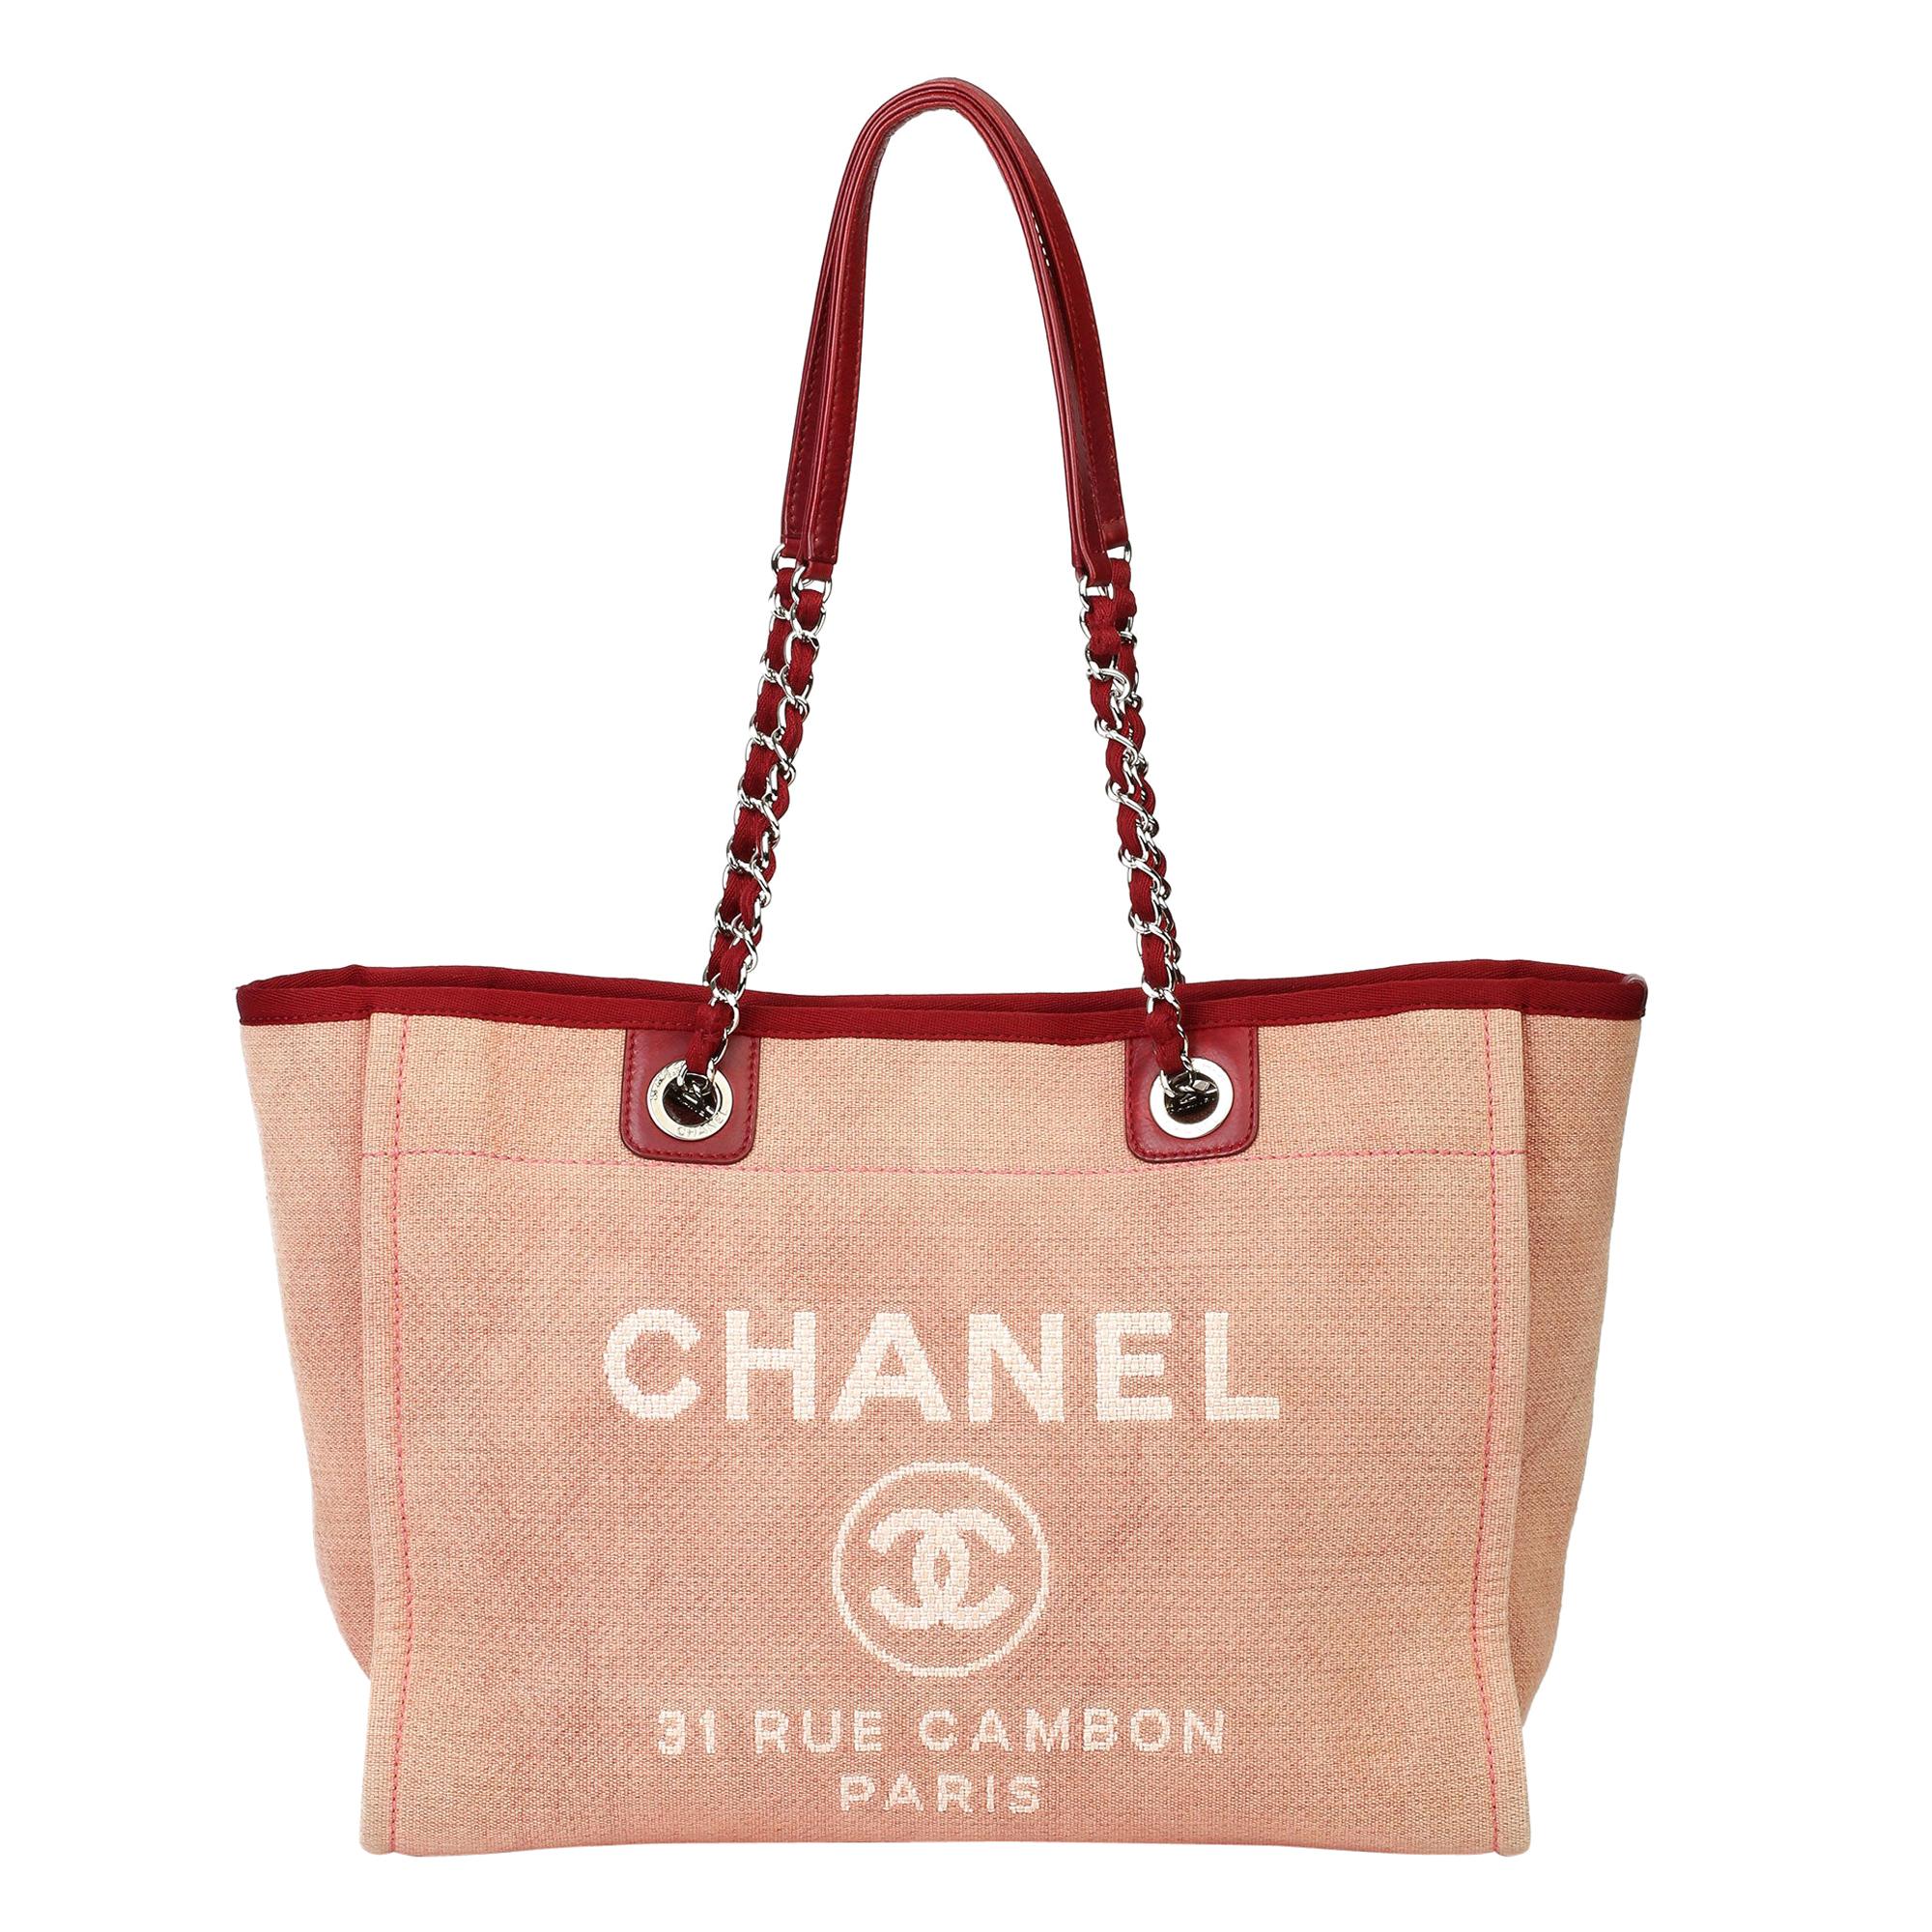 2012 Chanel Red Canvas & Calfskin Leather Small Deauville Tote